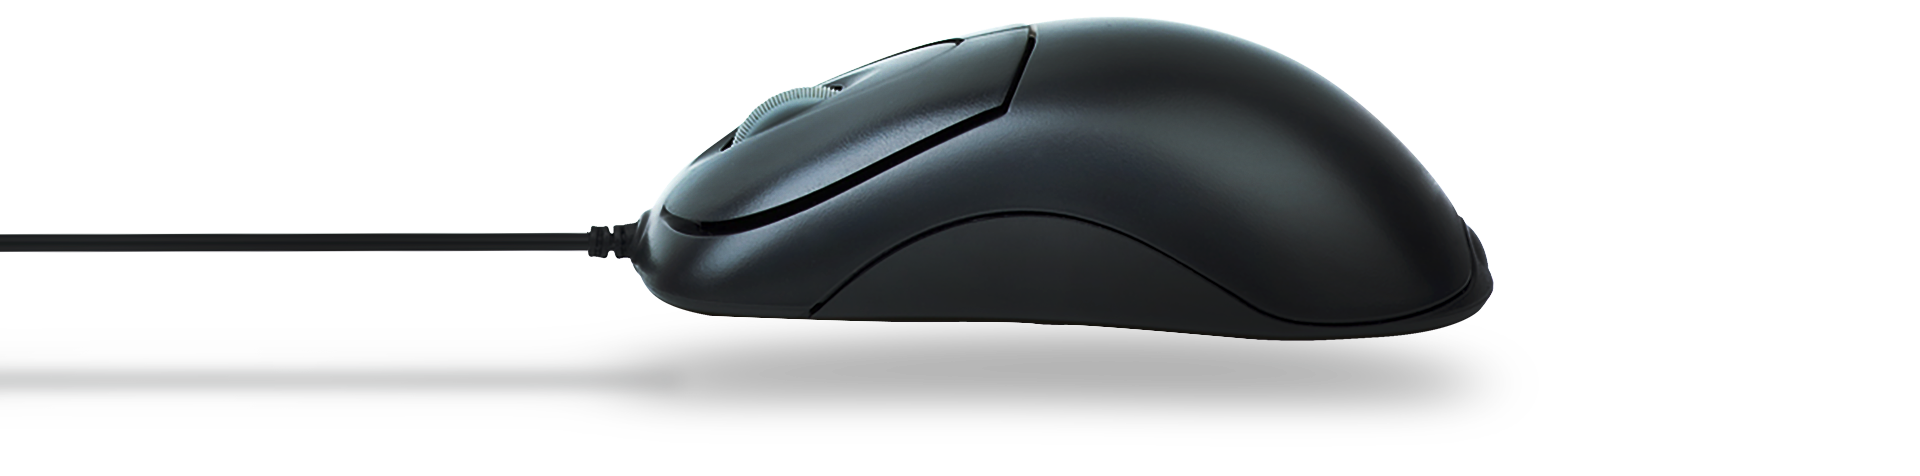 product mouse